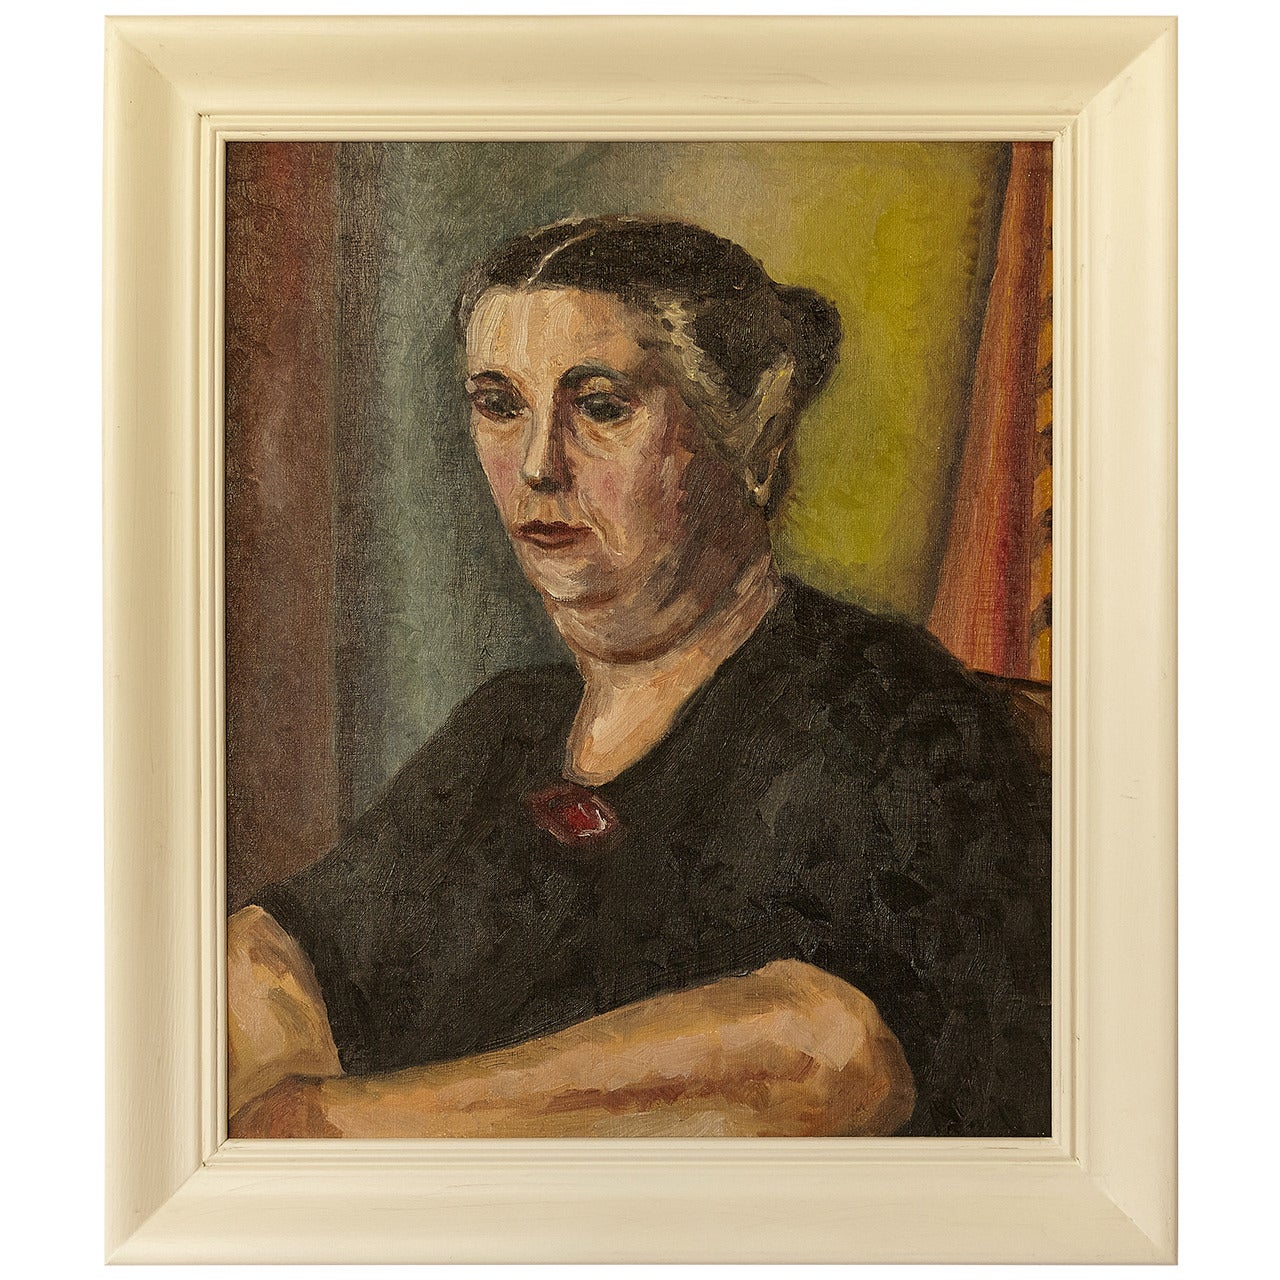 1948 Raymond Wendell Oil on Canvas Titled "Mother" For Sale